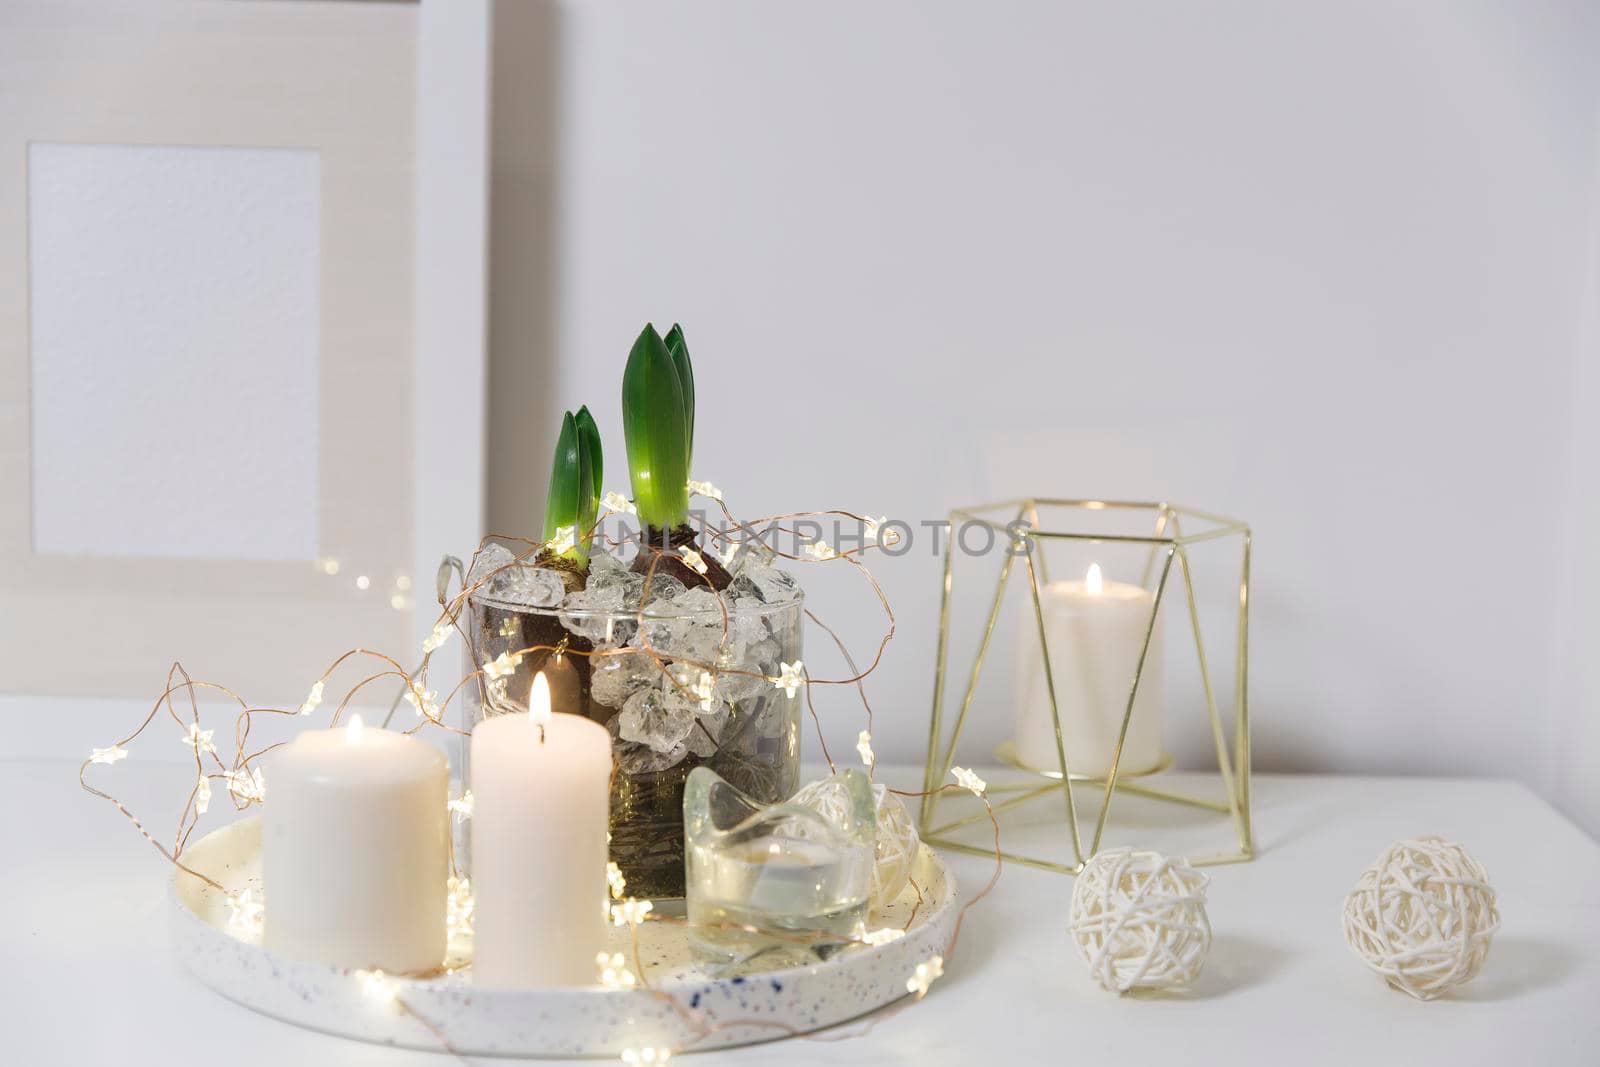 Two unopened hyacinths in a glass vase with artificial ice. Interior view in modern scandinavian style with painting canvas or poster on the wall. Living room, chest of drawers with vases.